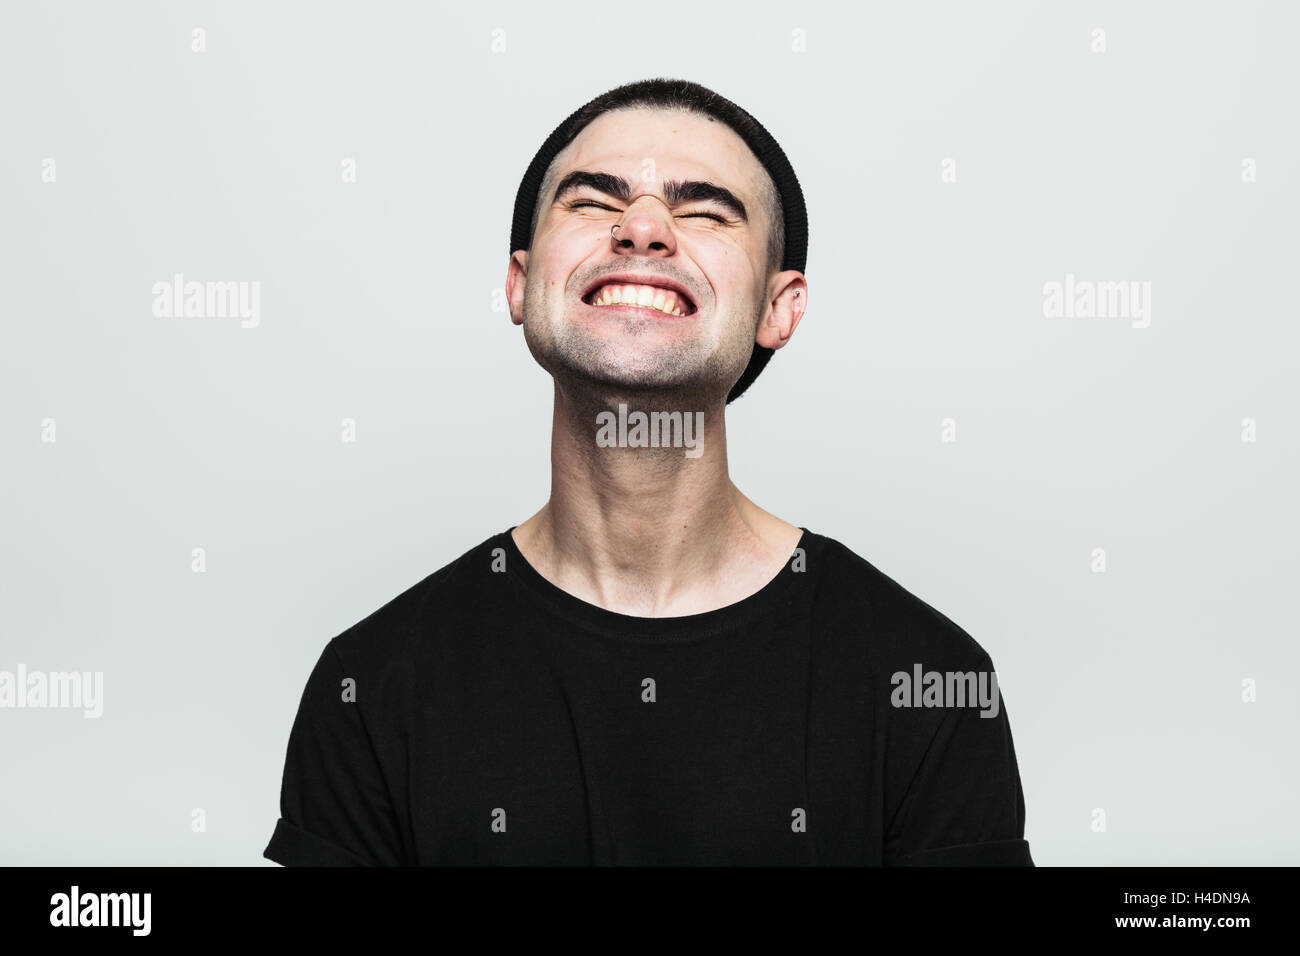 Man feeling exquisite pain while grinning Stock Photo